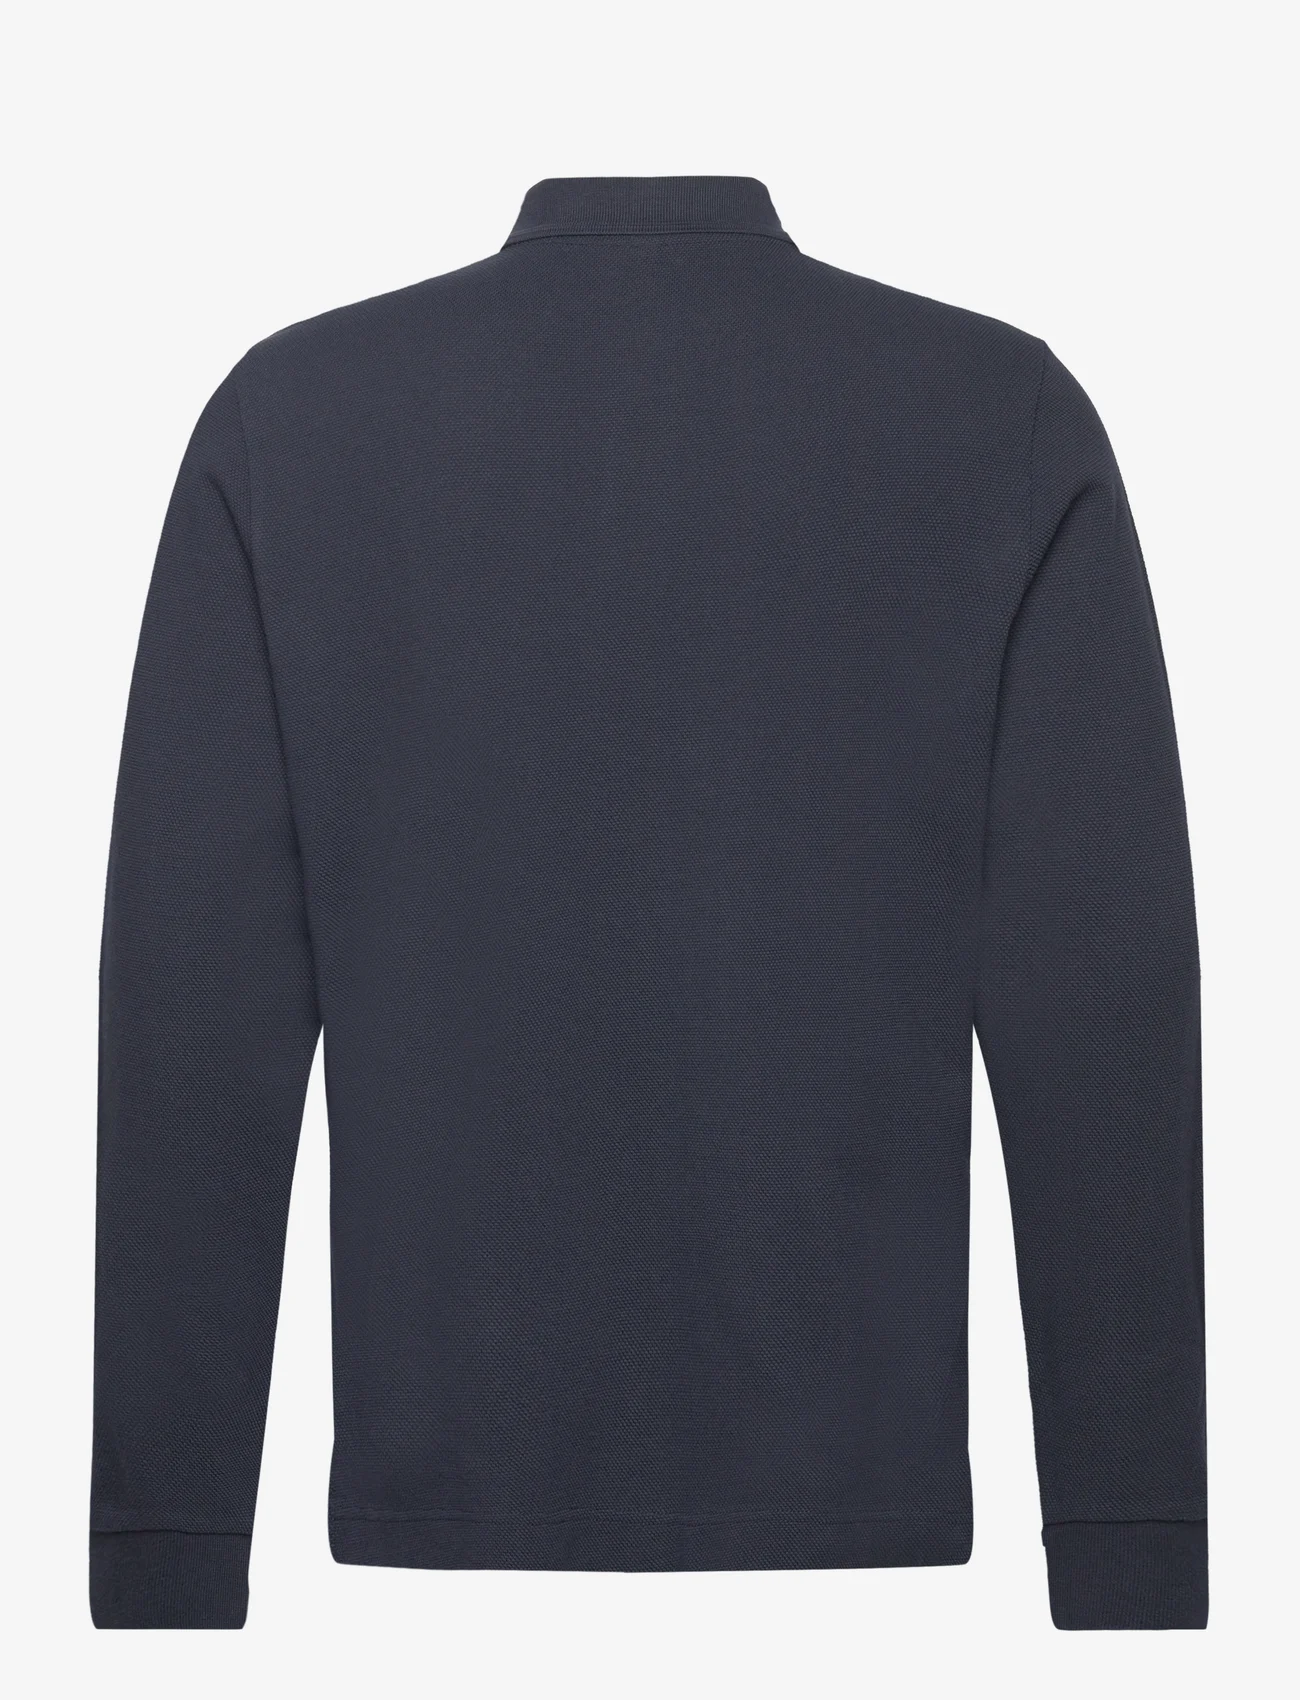 G-Star RAW - Essential polo l\s - langermede - salute - 1